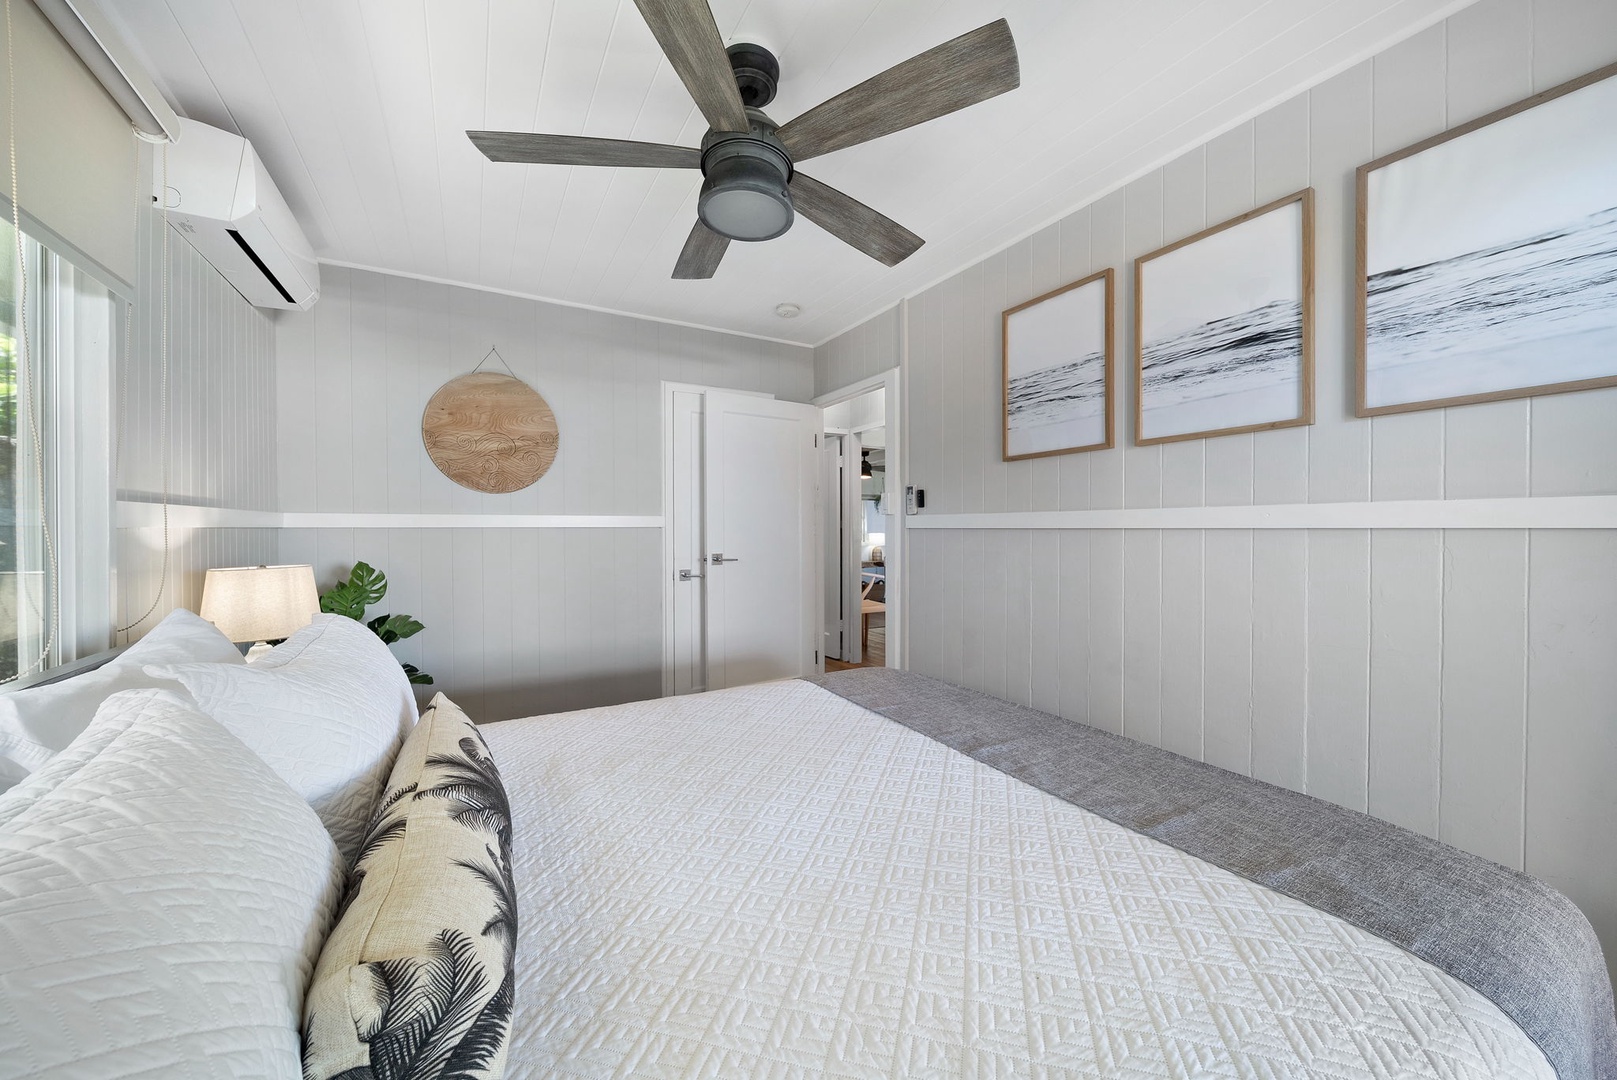 Haleiwa Vacation Rentals, Hale Nalu - King-size bed in the Main Bedroom